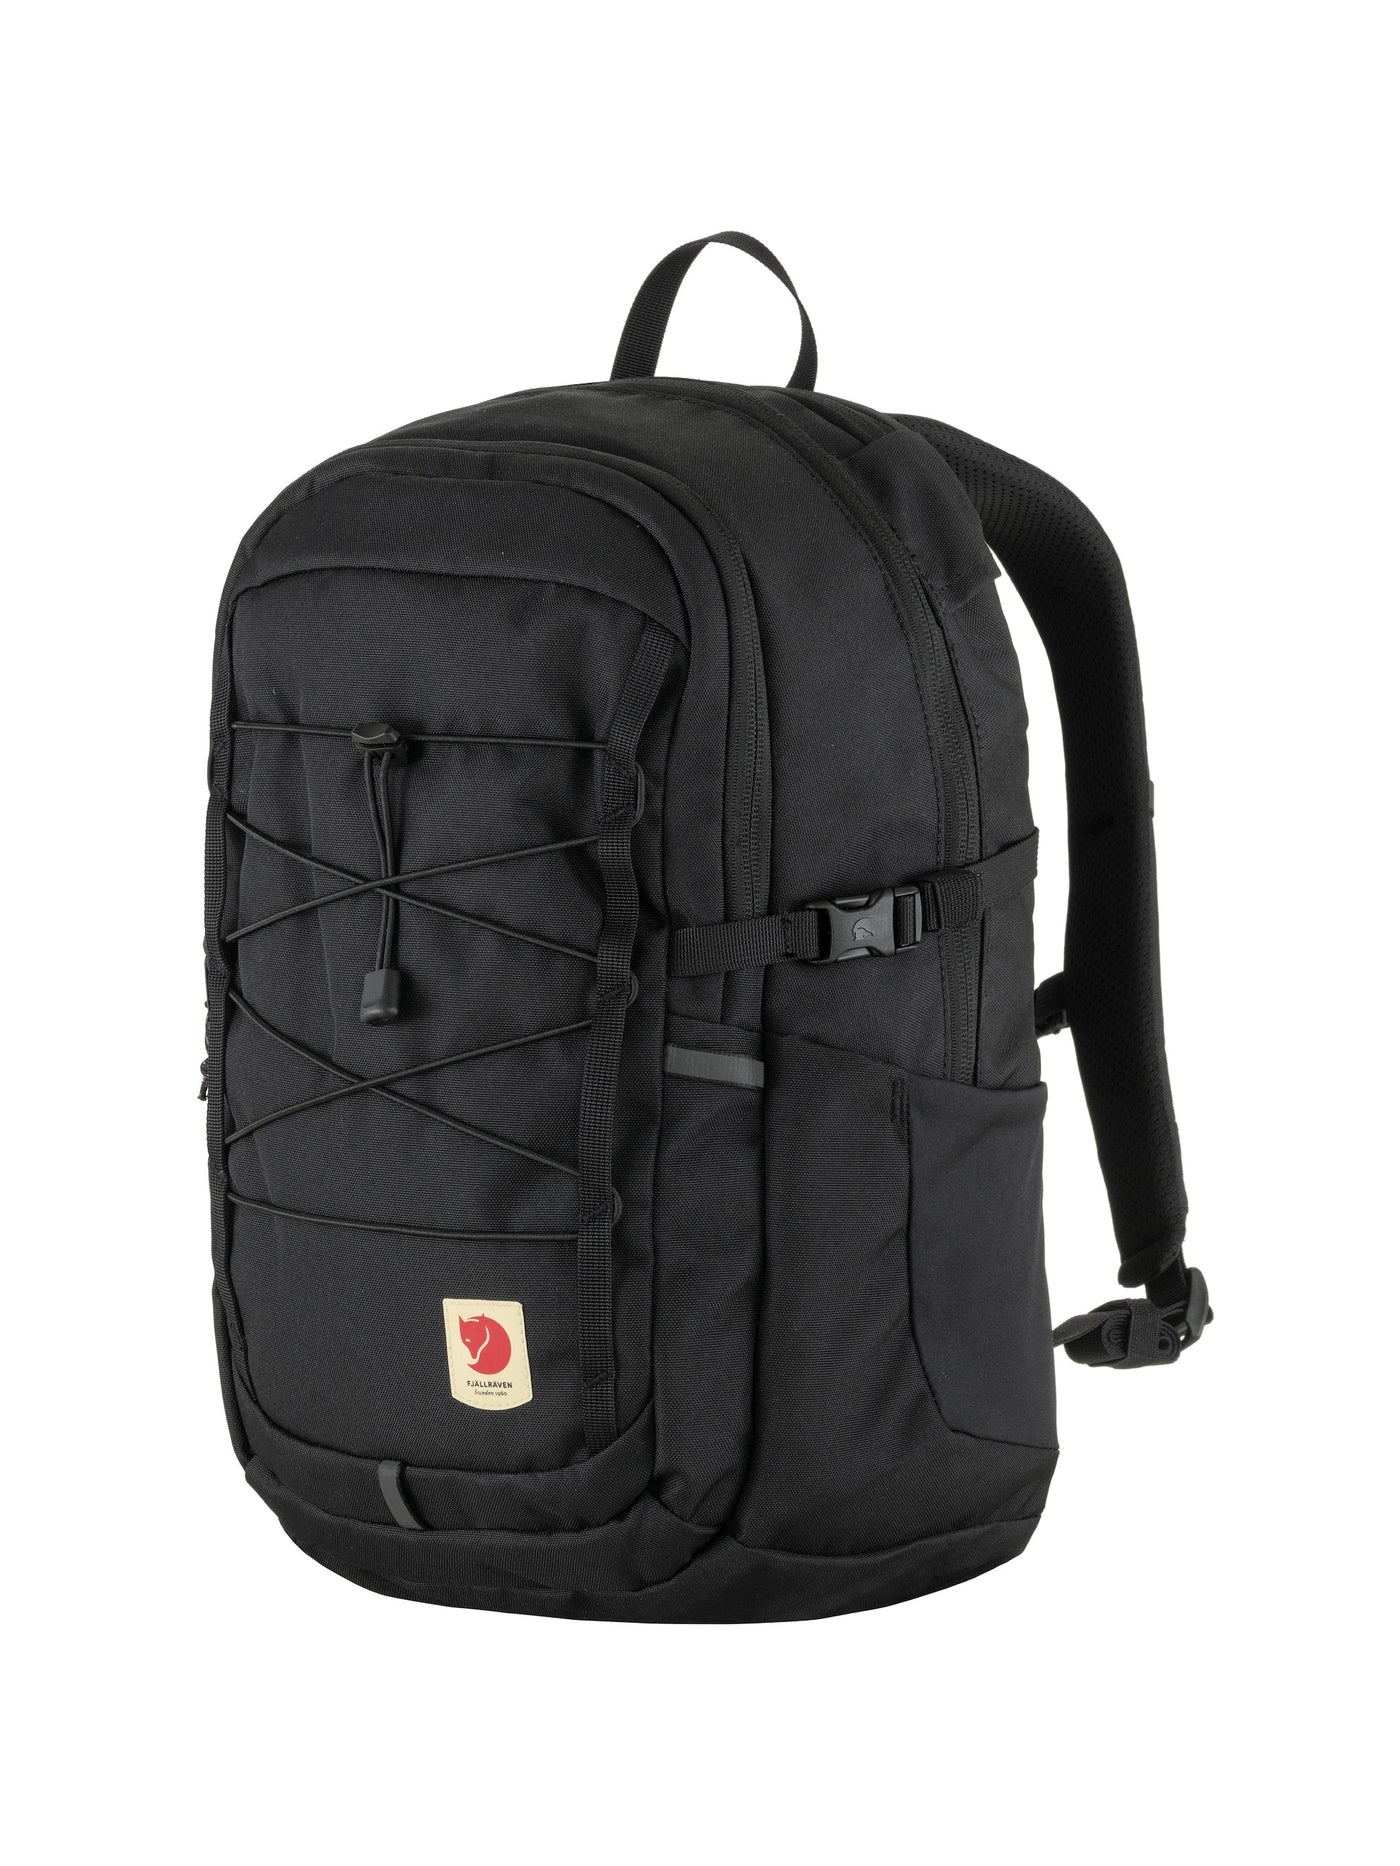 Skule - Backpack for children and teenagers 20 l